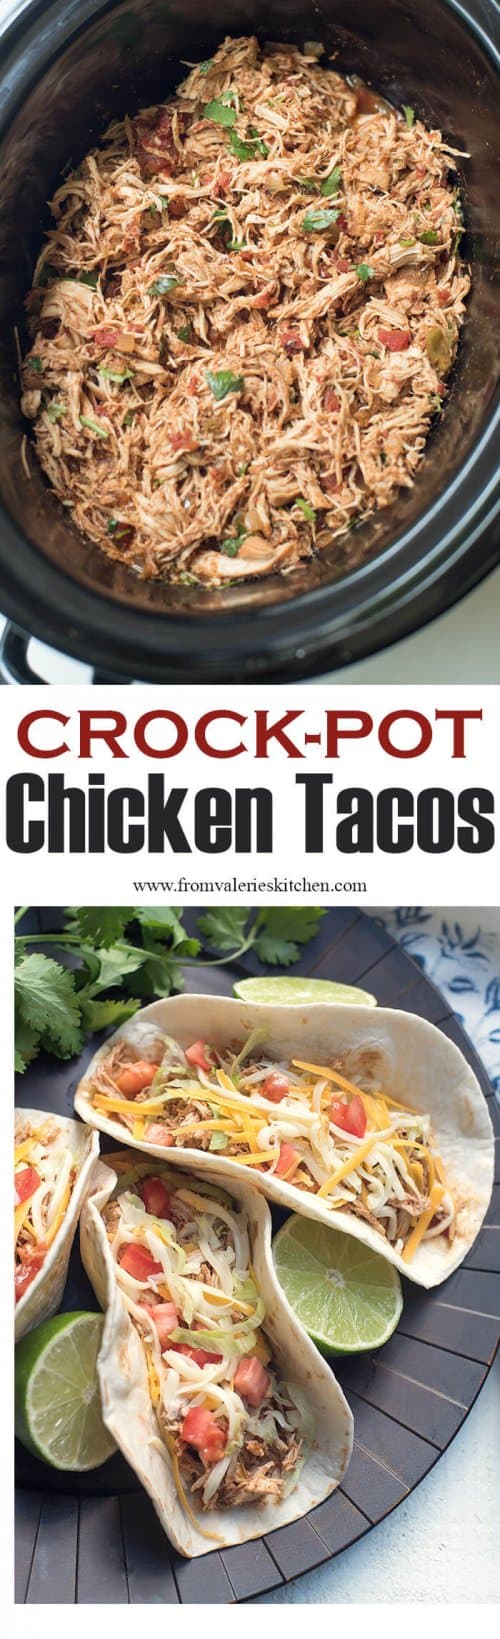 A two image collage of shredded chicken in a slow cooker and Crock Pot Chicken Tacos on a brown platter.